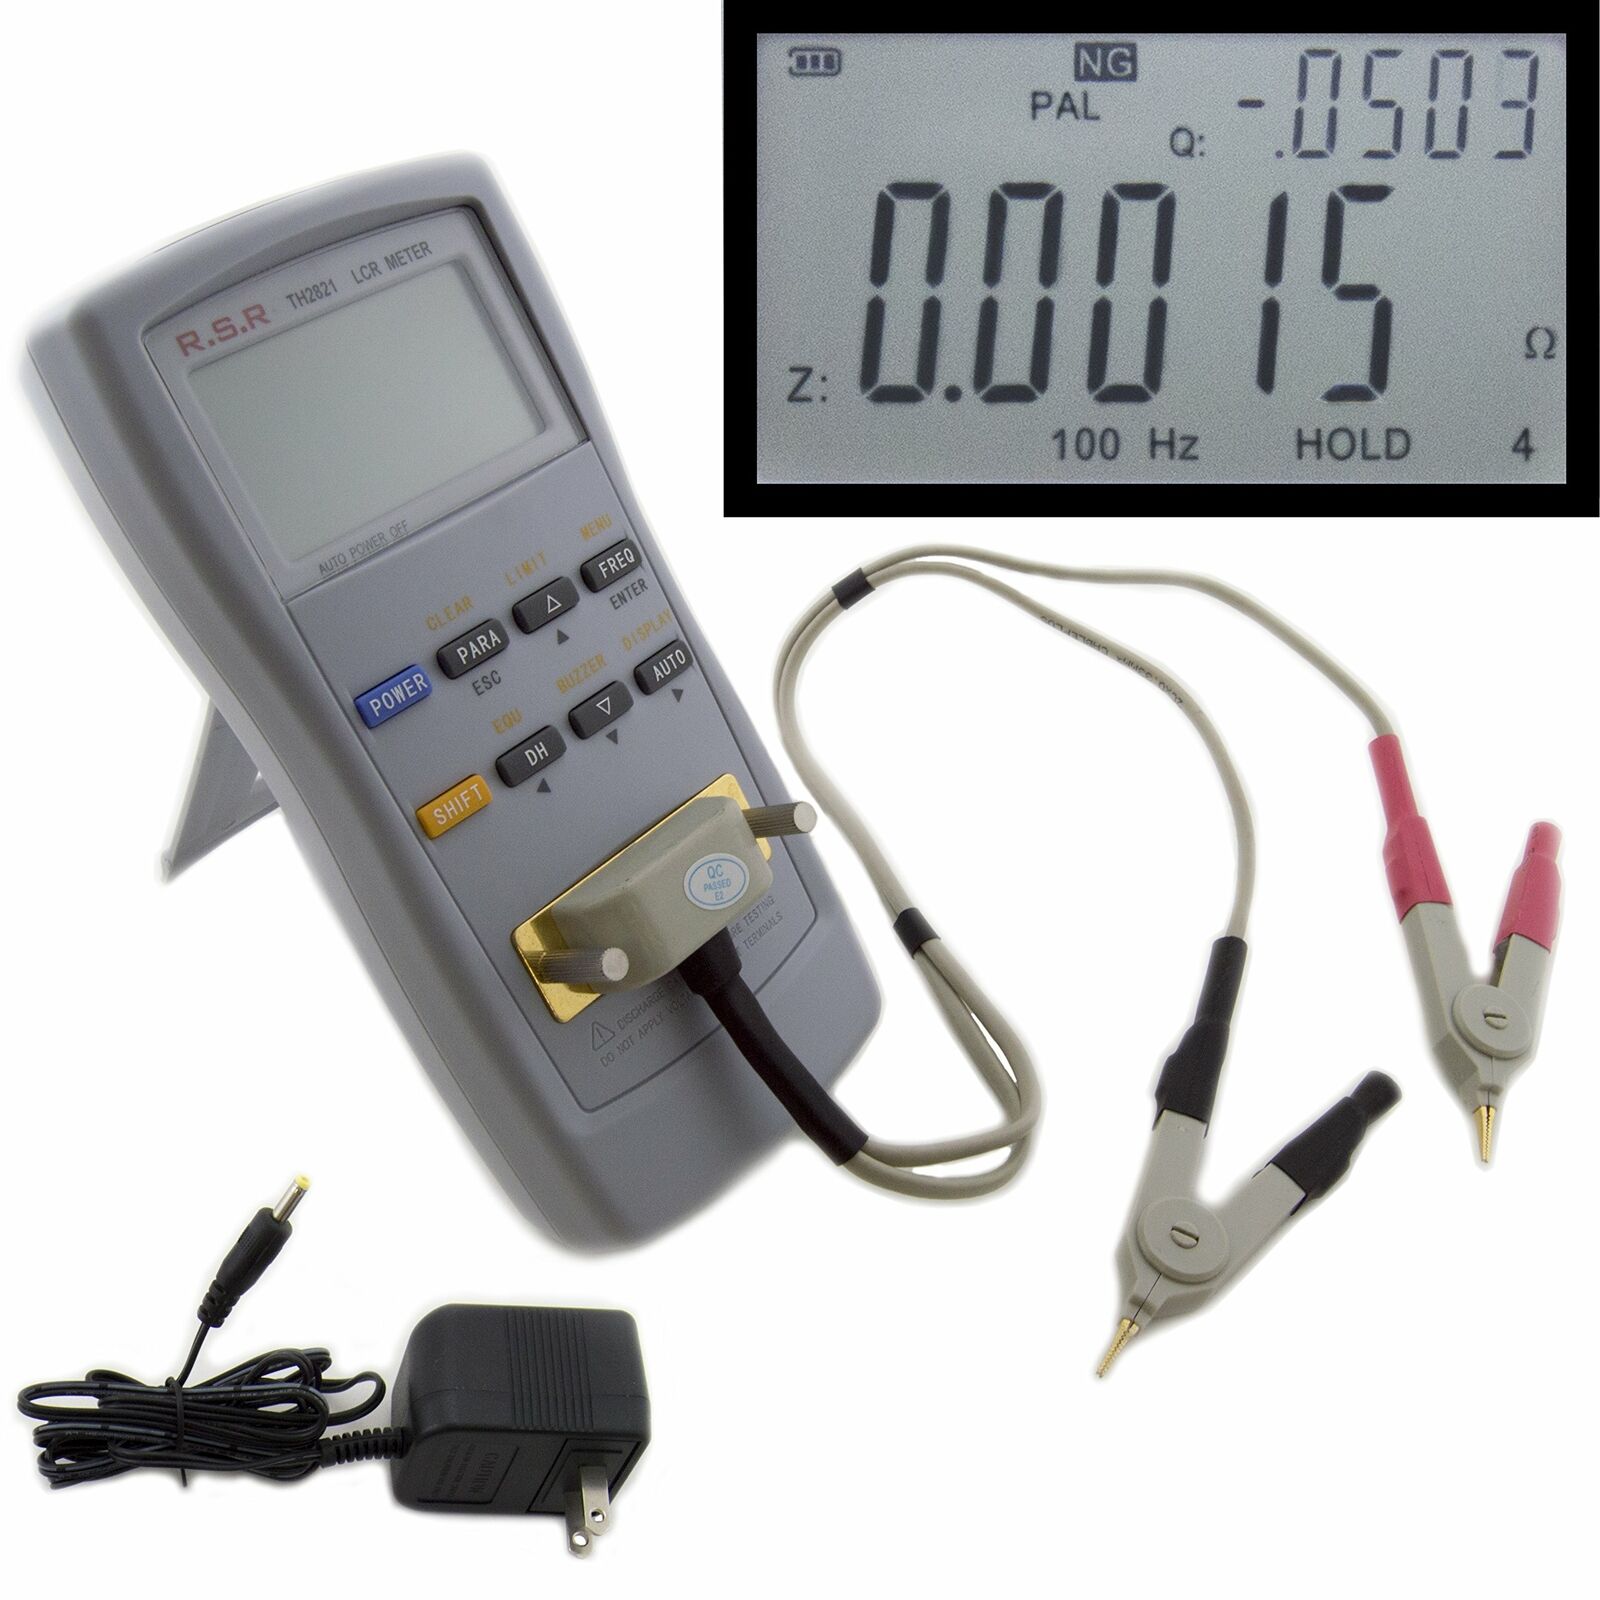 LCR Meter - Test Frequencies: 1KHz Opening Sale price large release sale 120Hz 100Hz Parameters